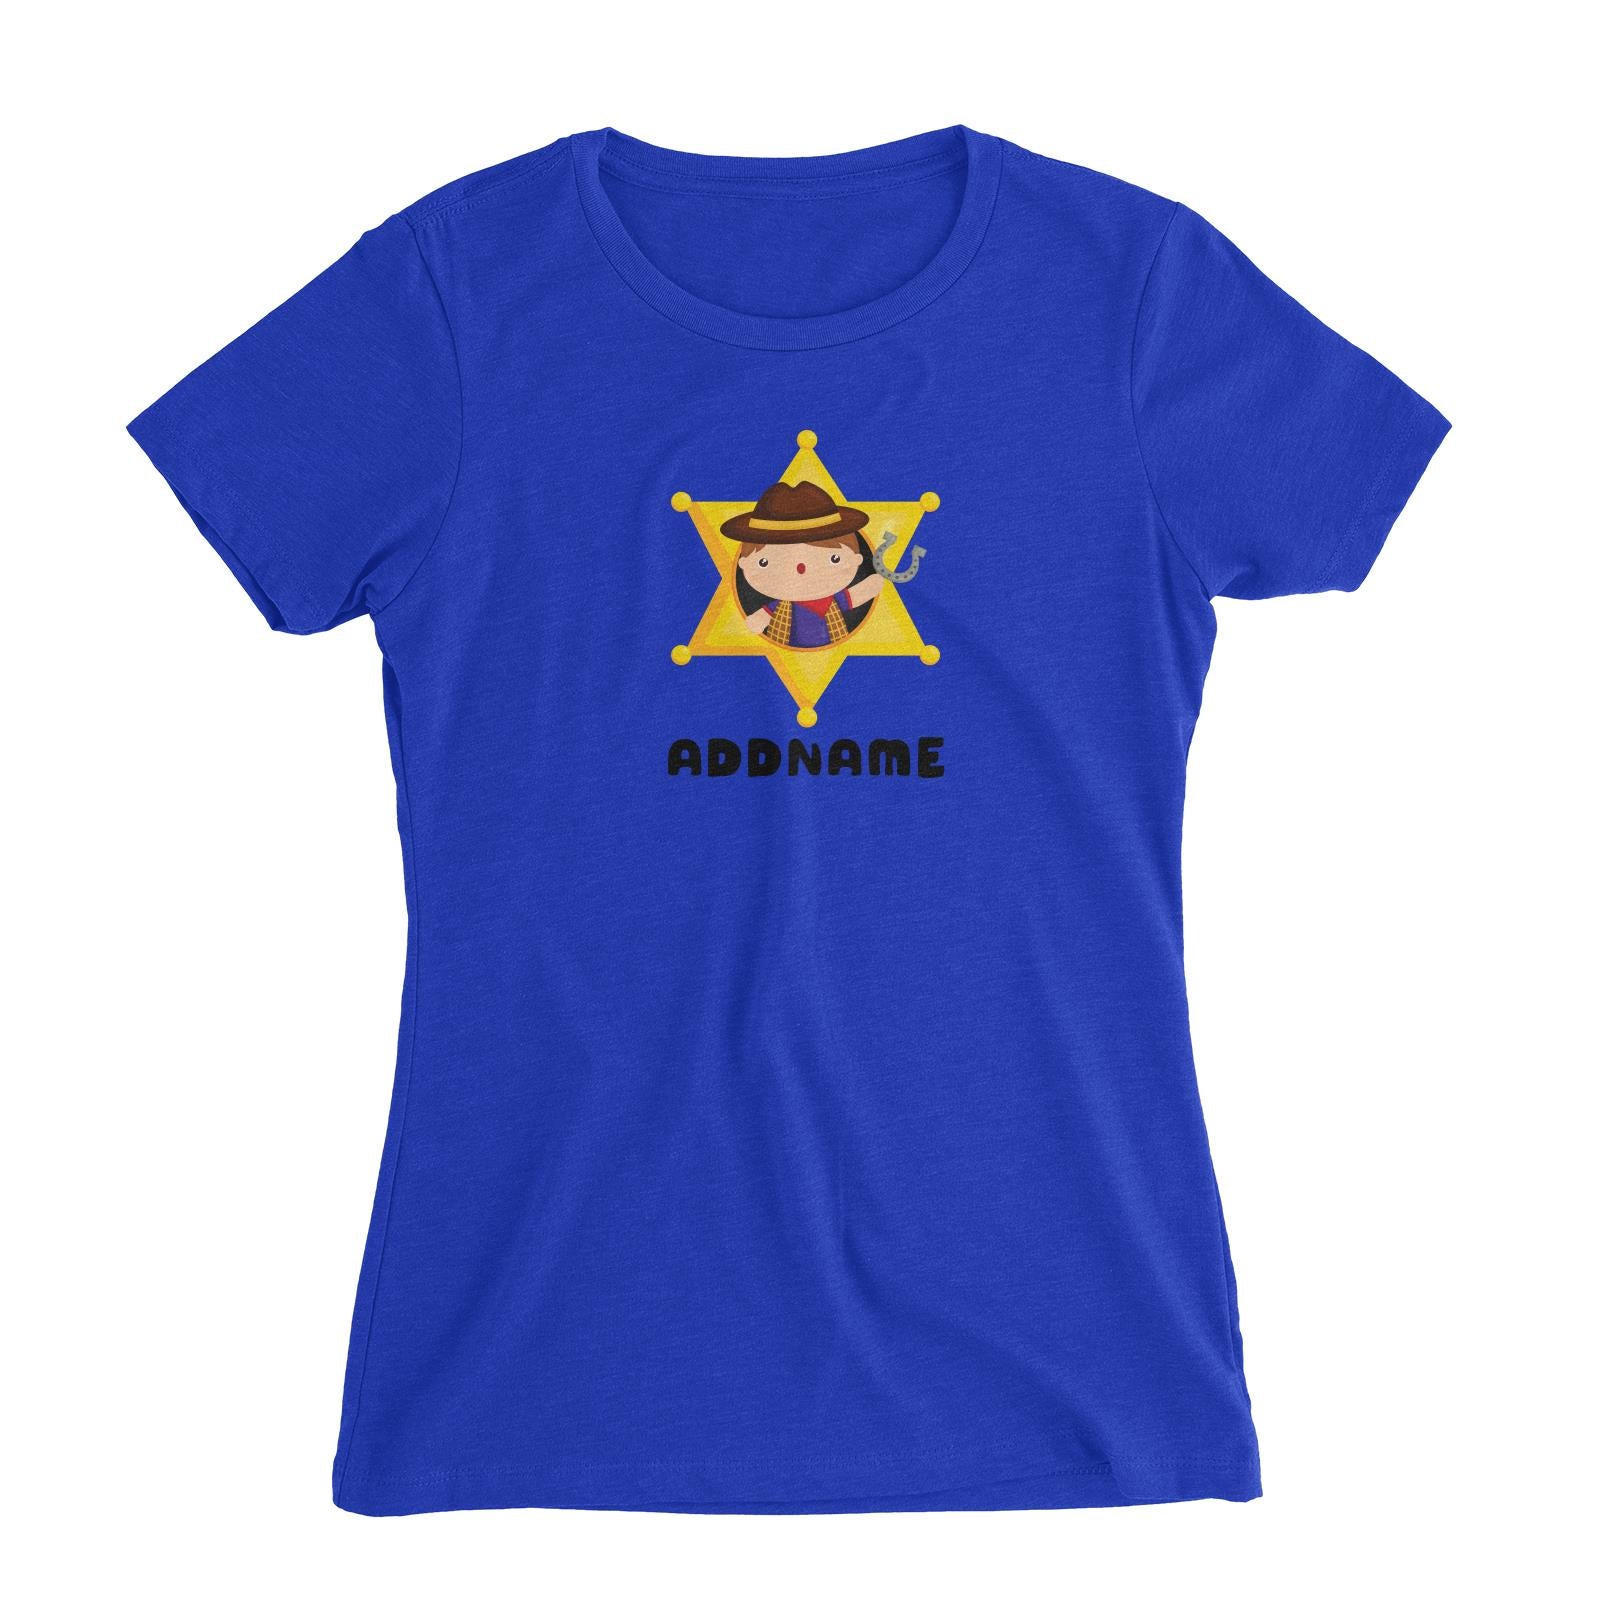 Birthday Cowboy Style Little Cowboy Holding Hoe In Star Badge Addname Women's Slim Fit T-Shirt